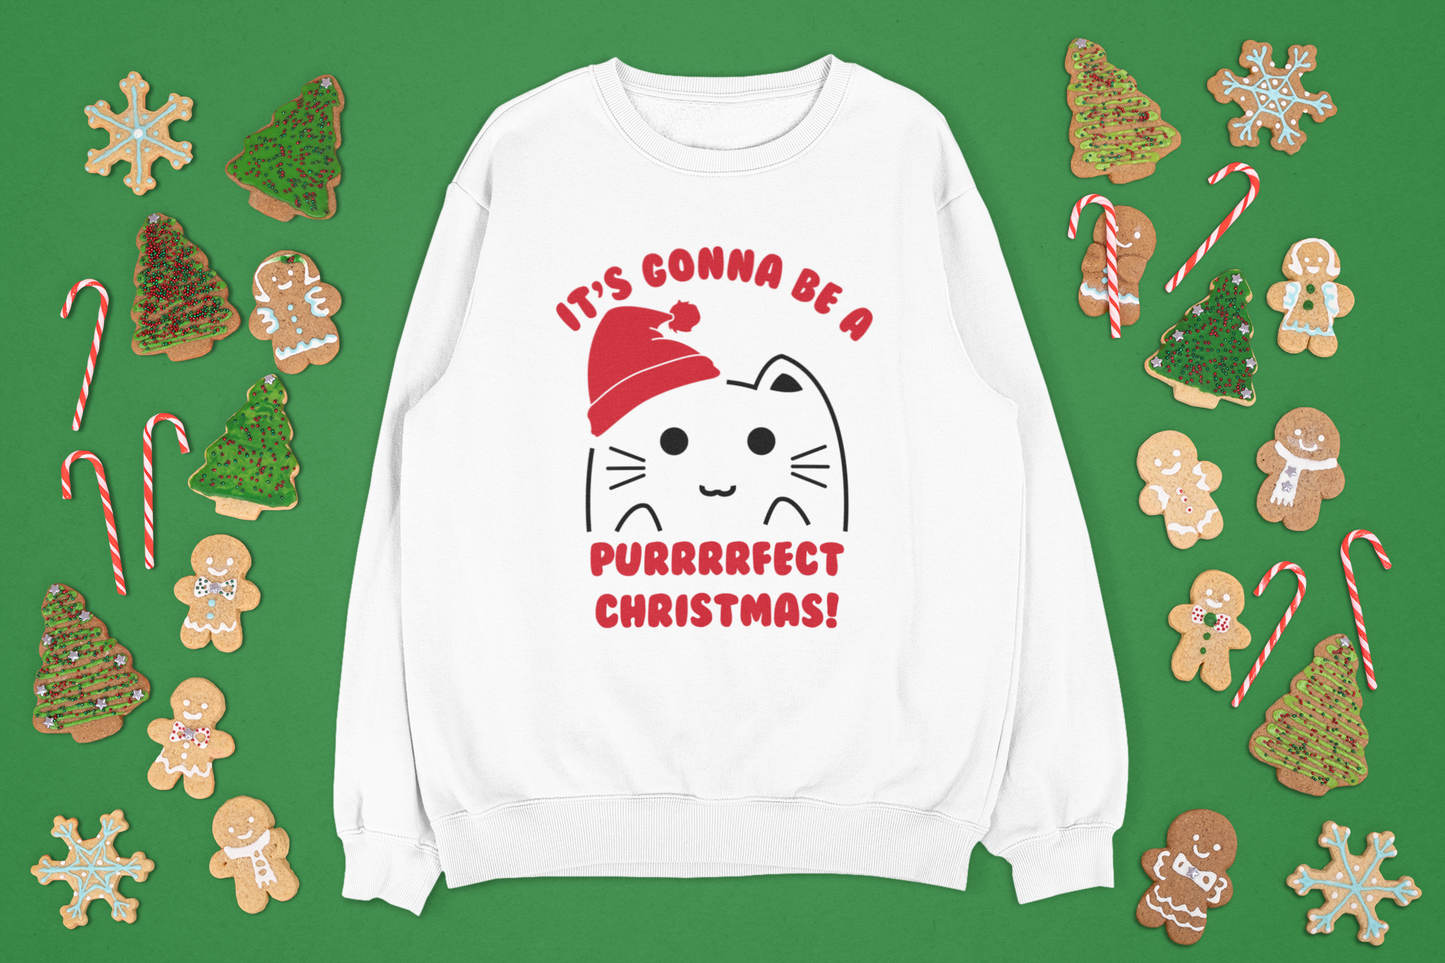 it's gonna be a purrfect christmas